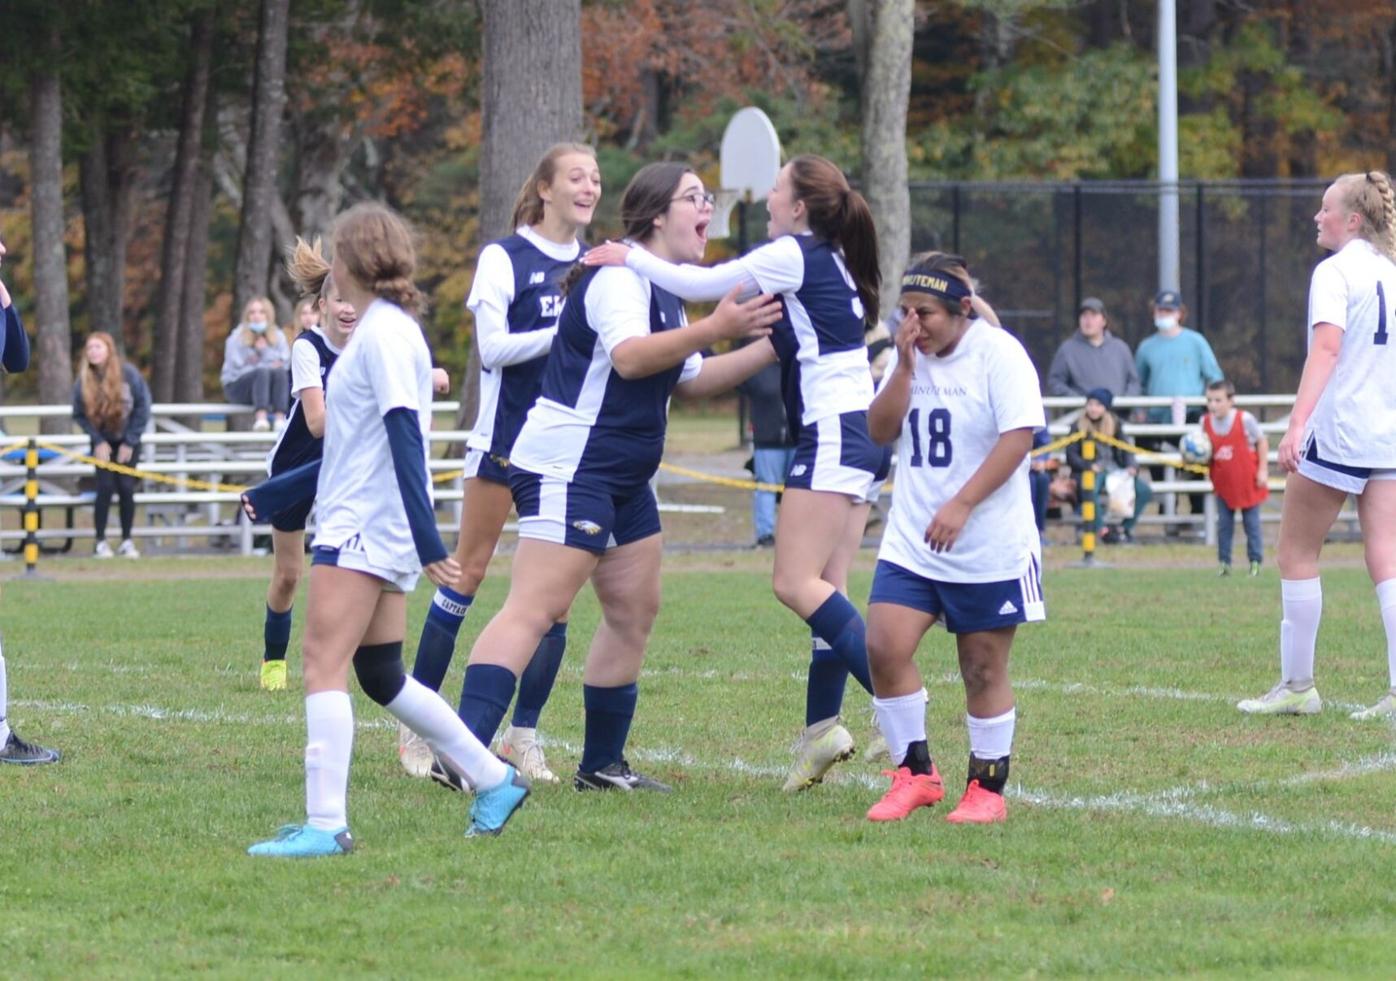 The Eagles celebrate a goal by Megan Loring